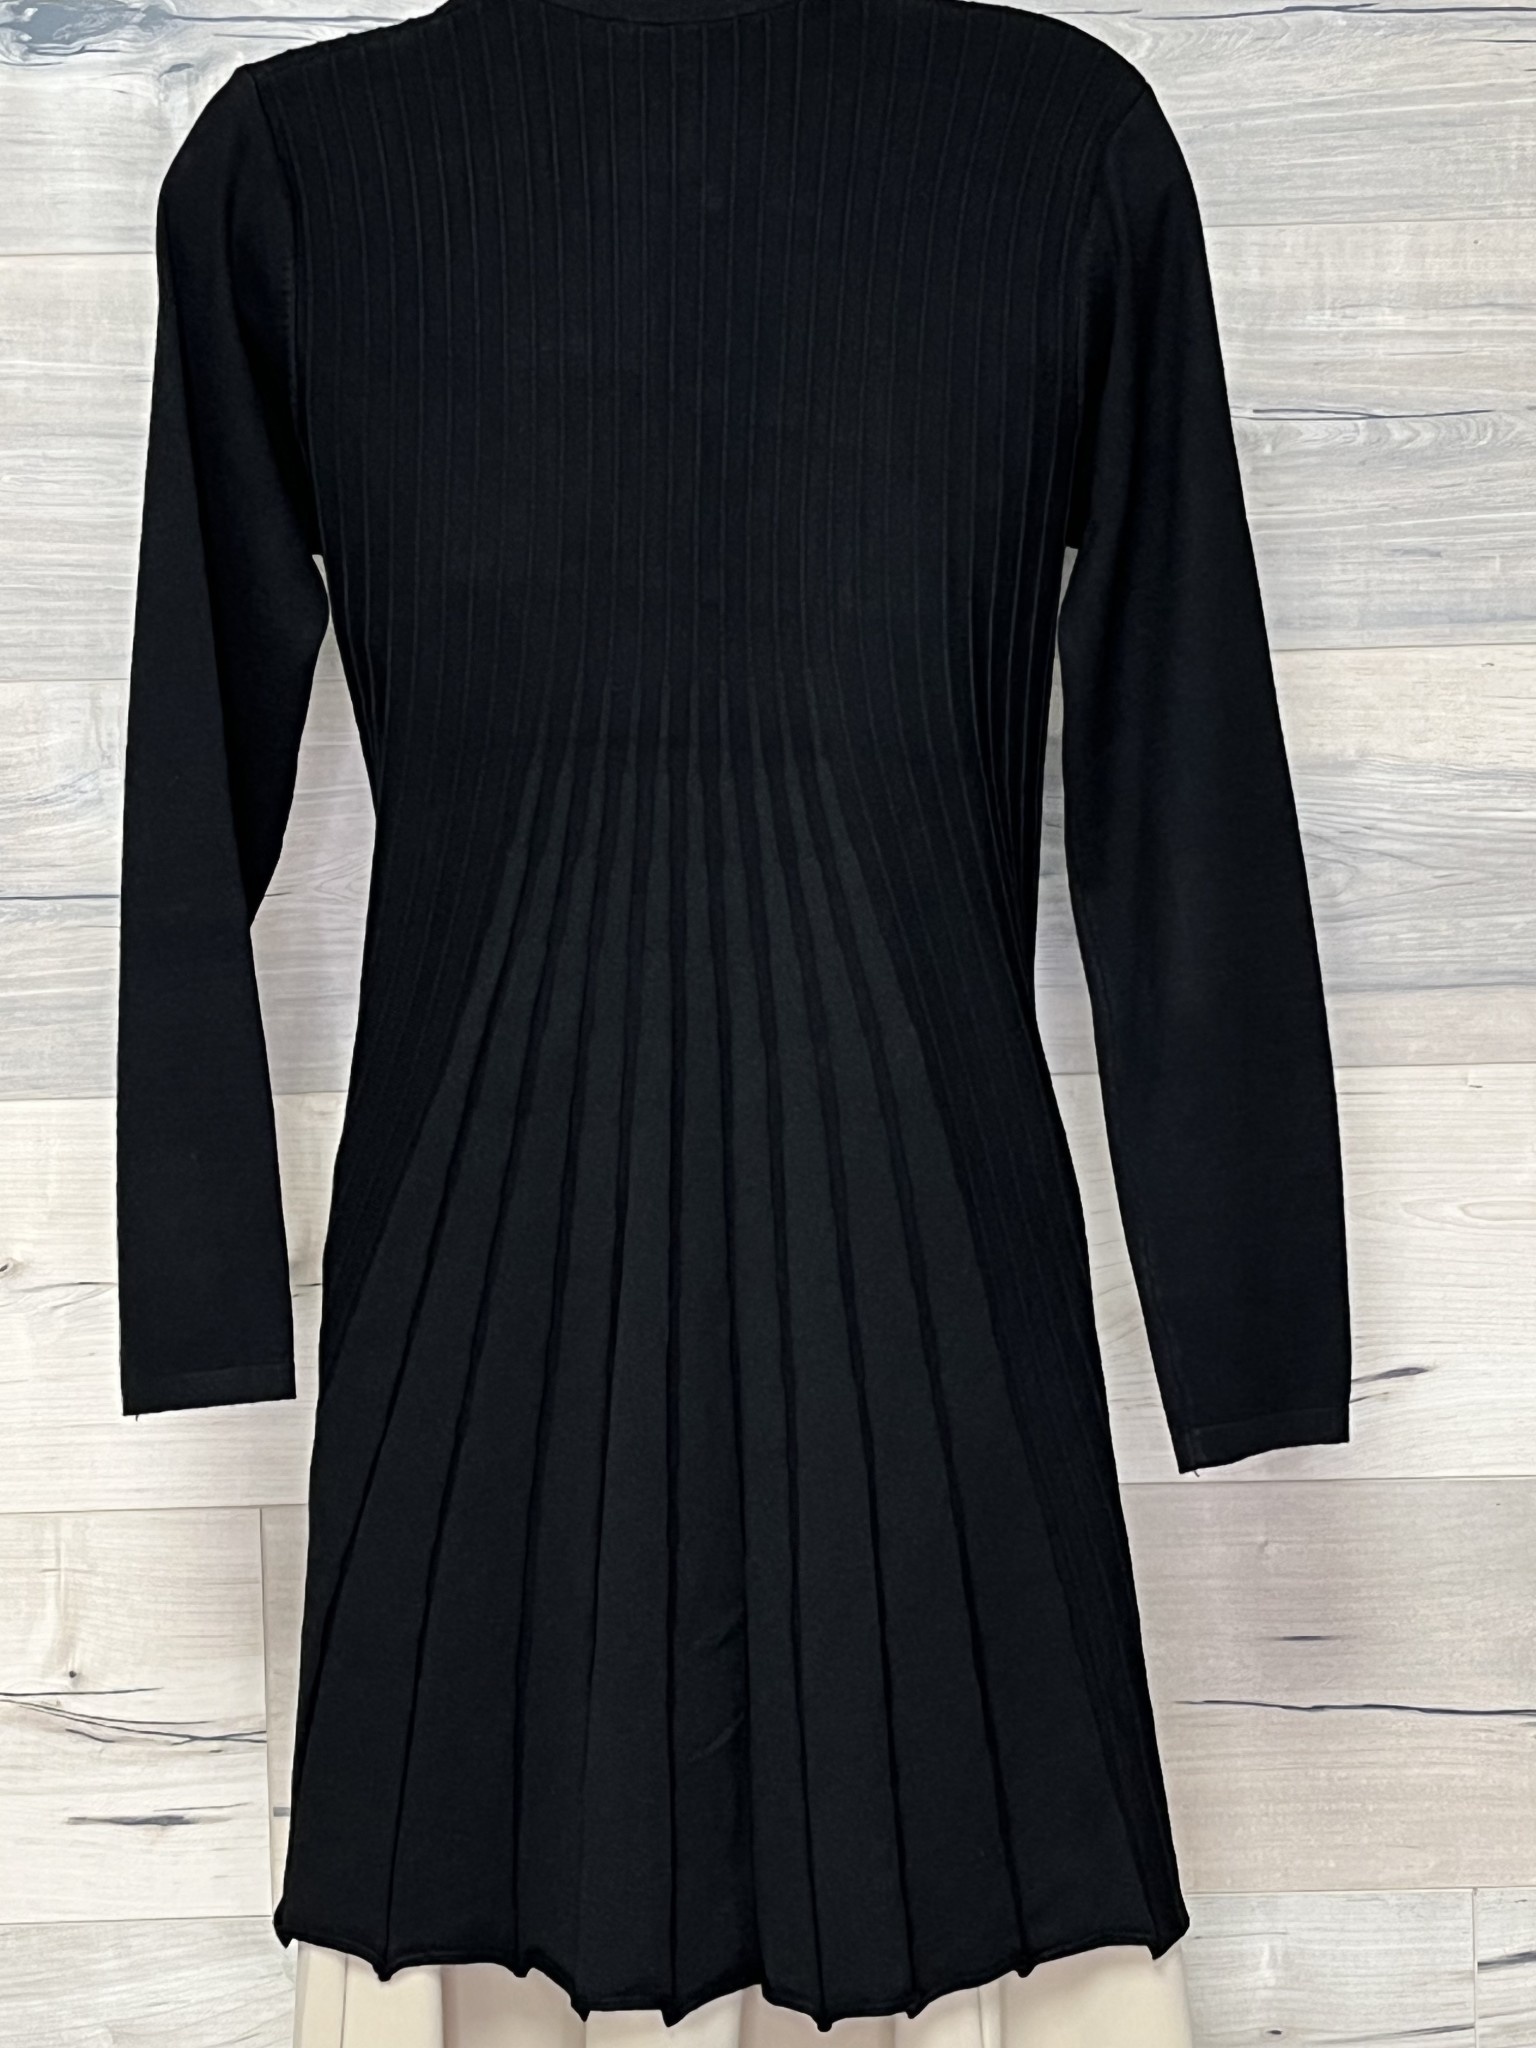 Knit Open Front Cardigan with Tailoring Pleats - Black